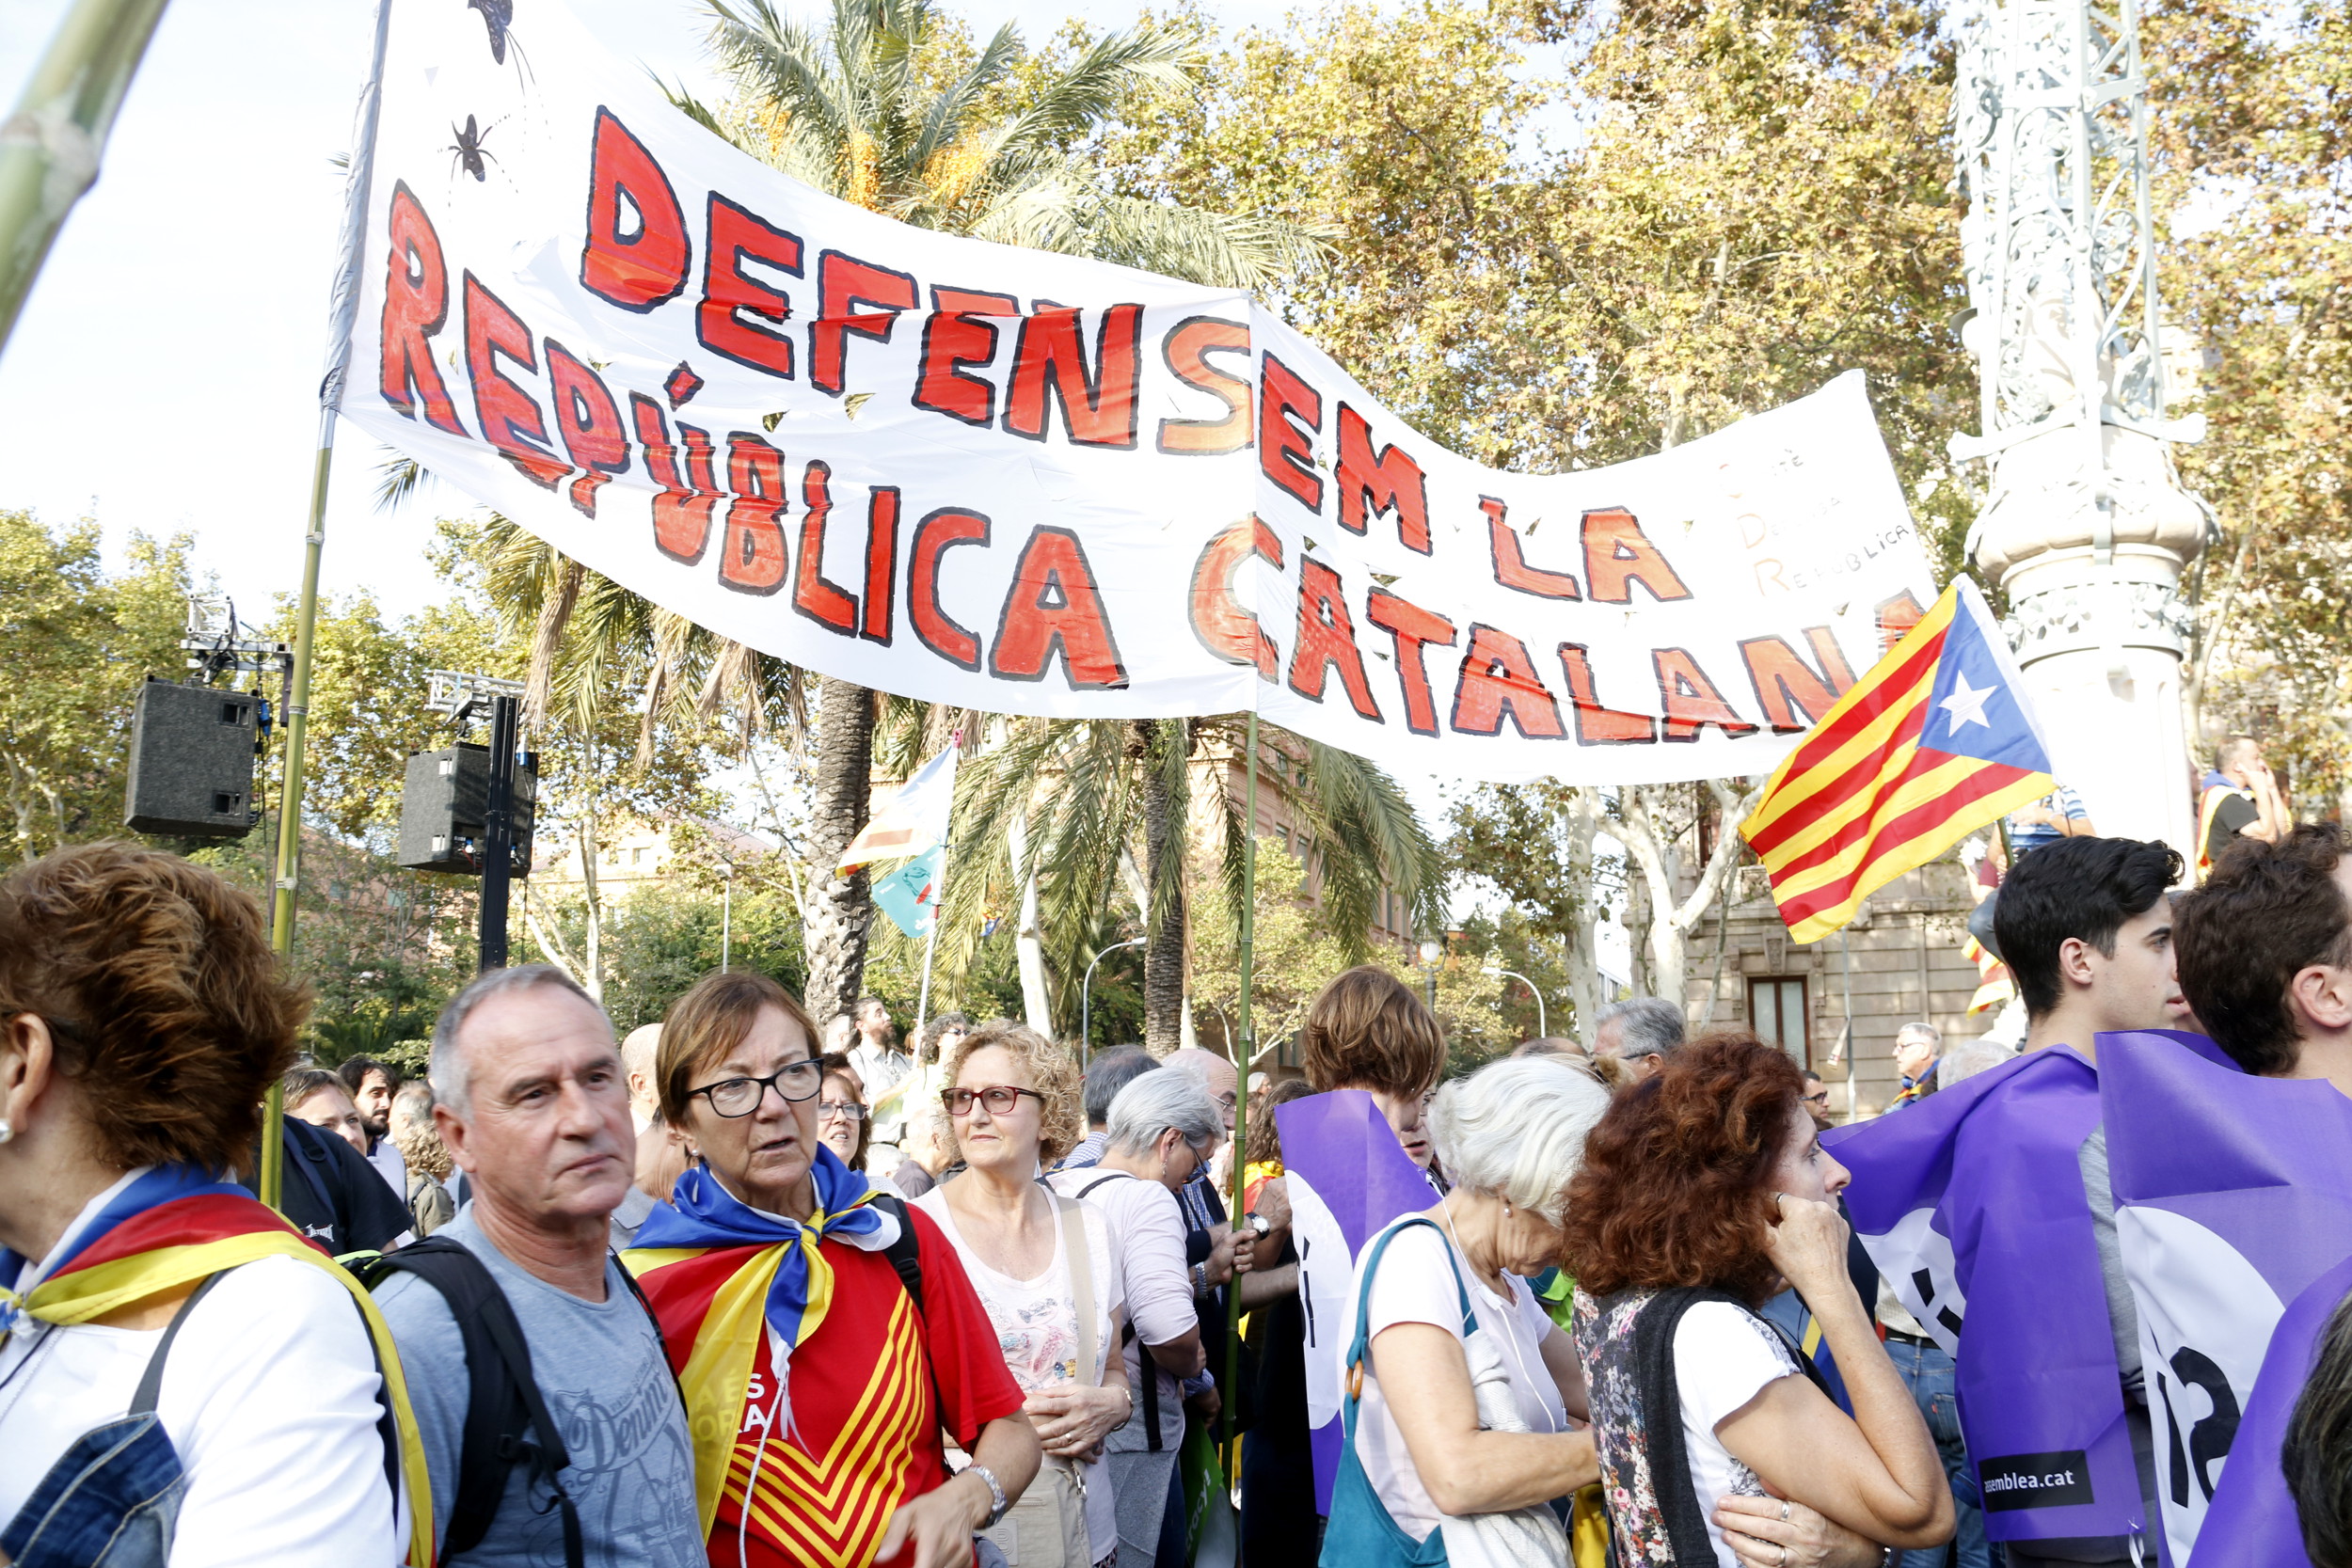 Crowds gathered near Catalan parliament buildings on Tuesday afternoon (by ACN)